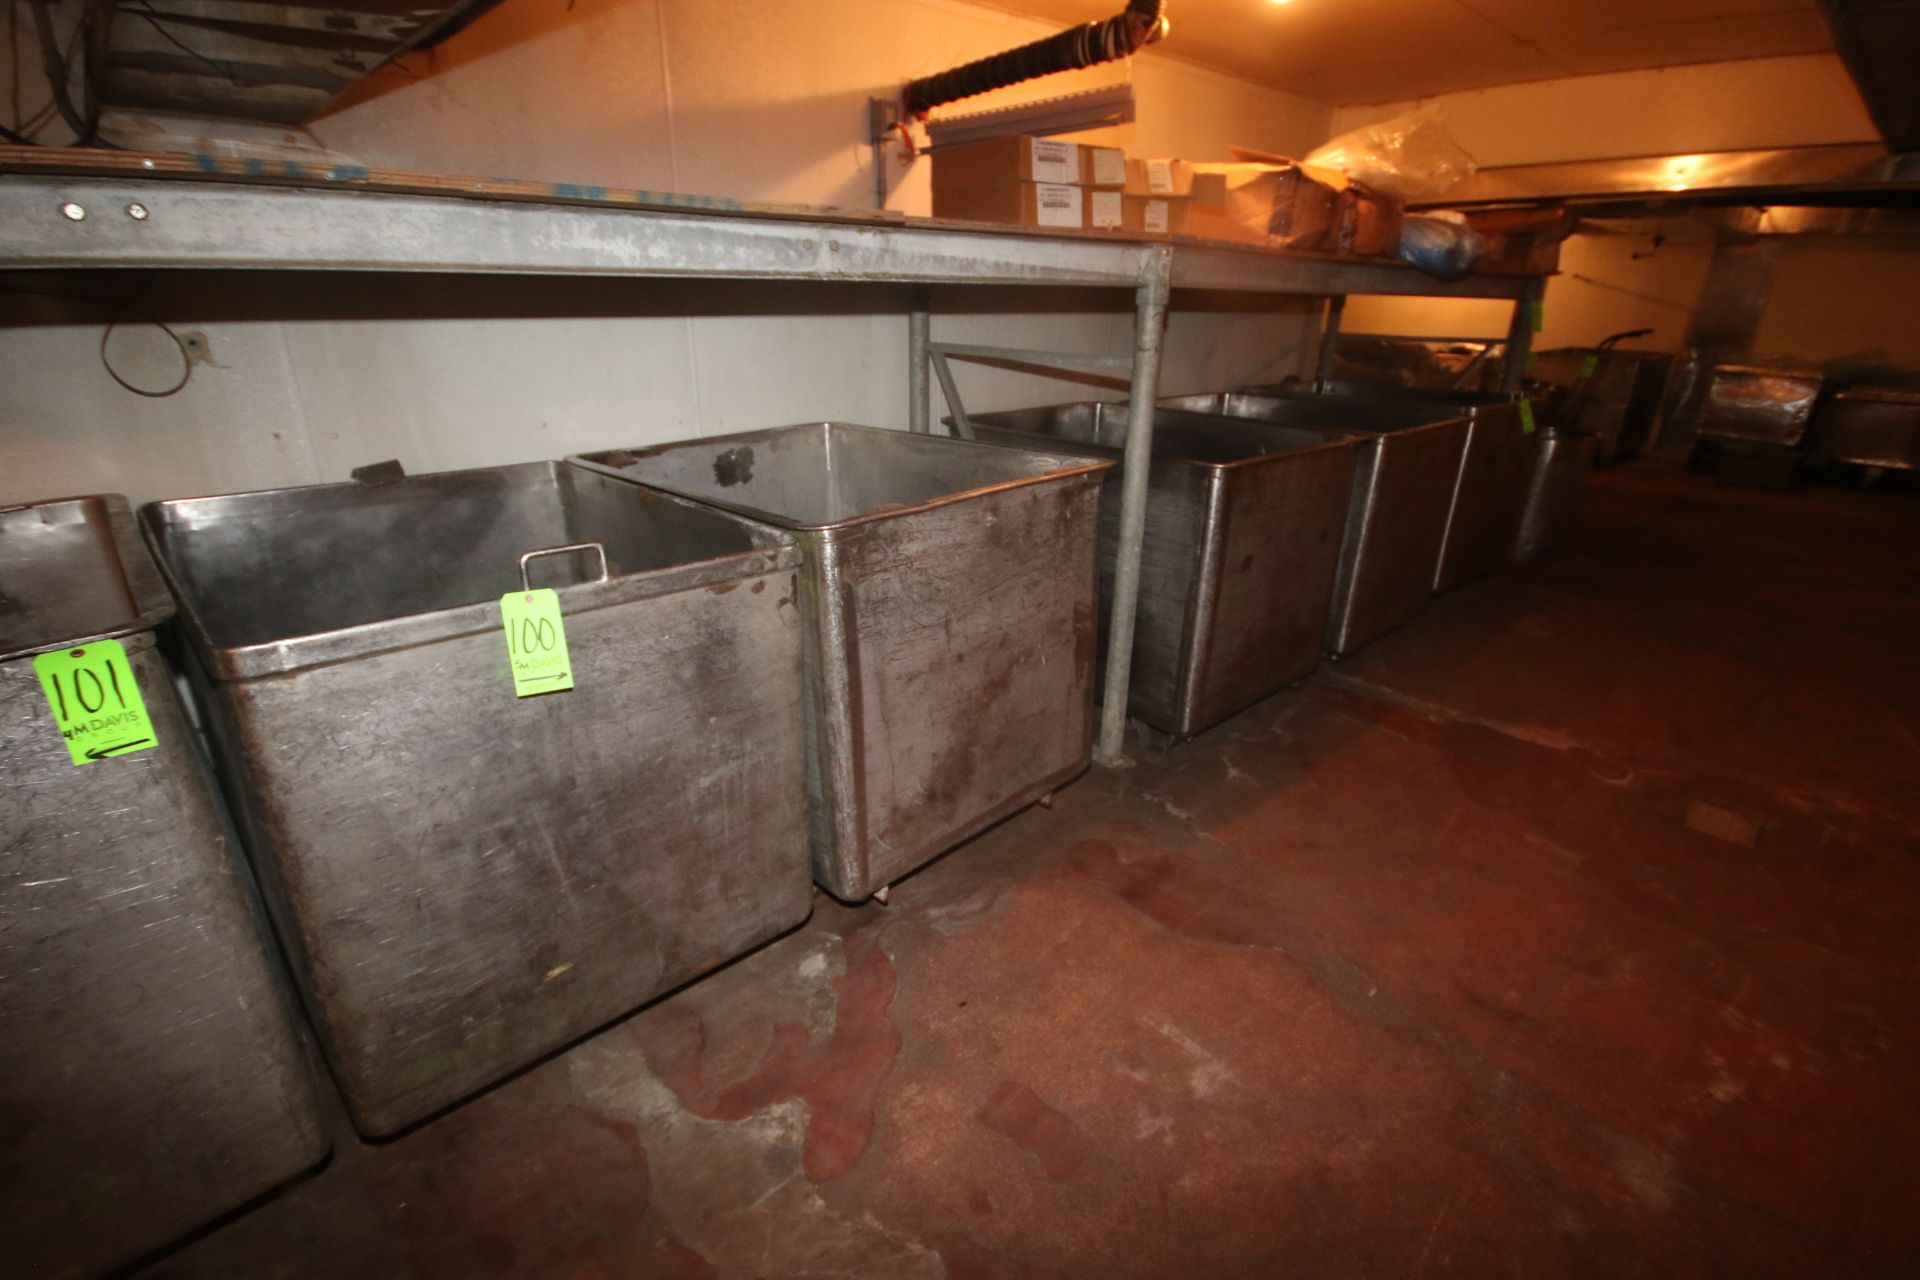 S/S Stationary Totes, Overall Dims.: Aprox. 49" L x 37" W x 45" H (Located on Basement Floor--McKees